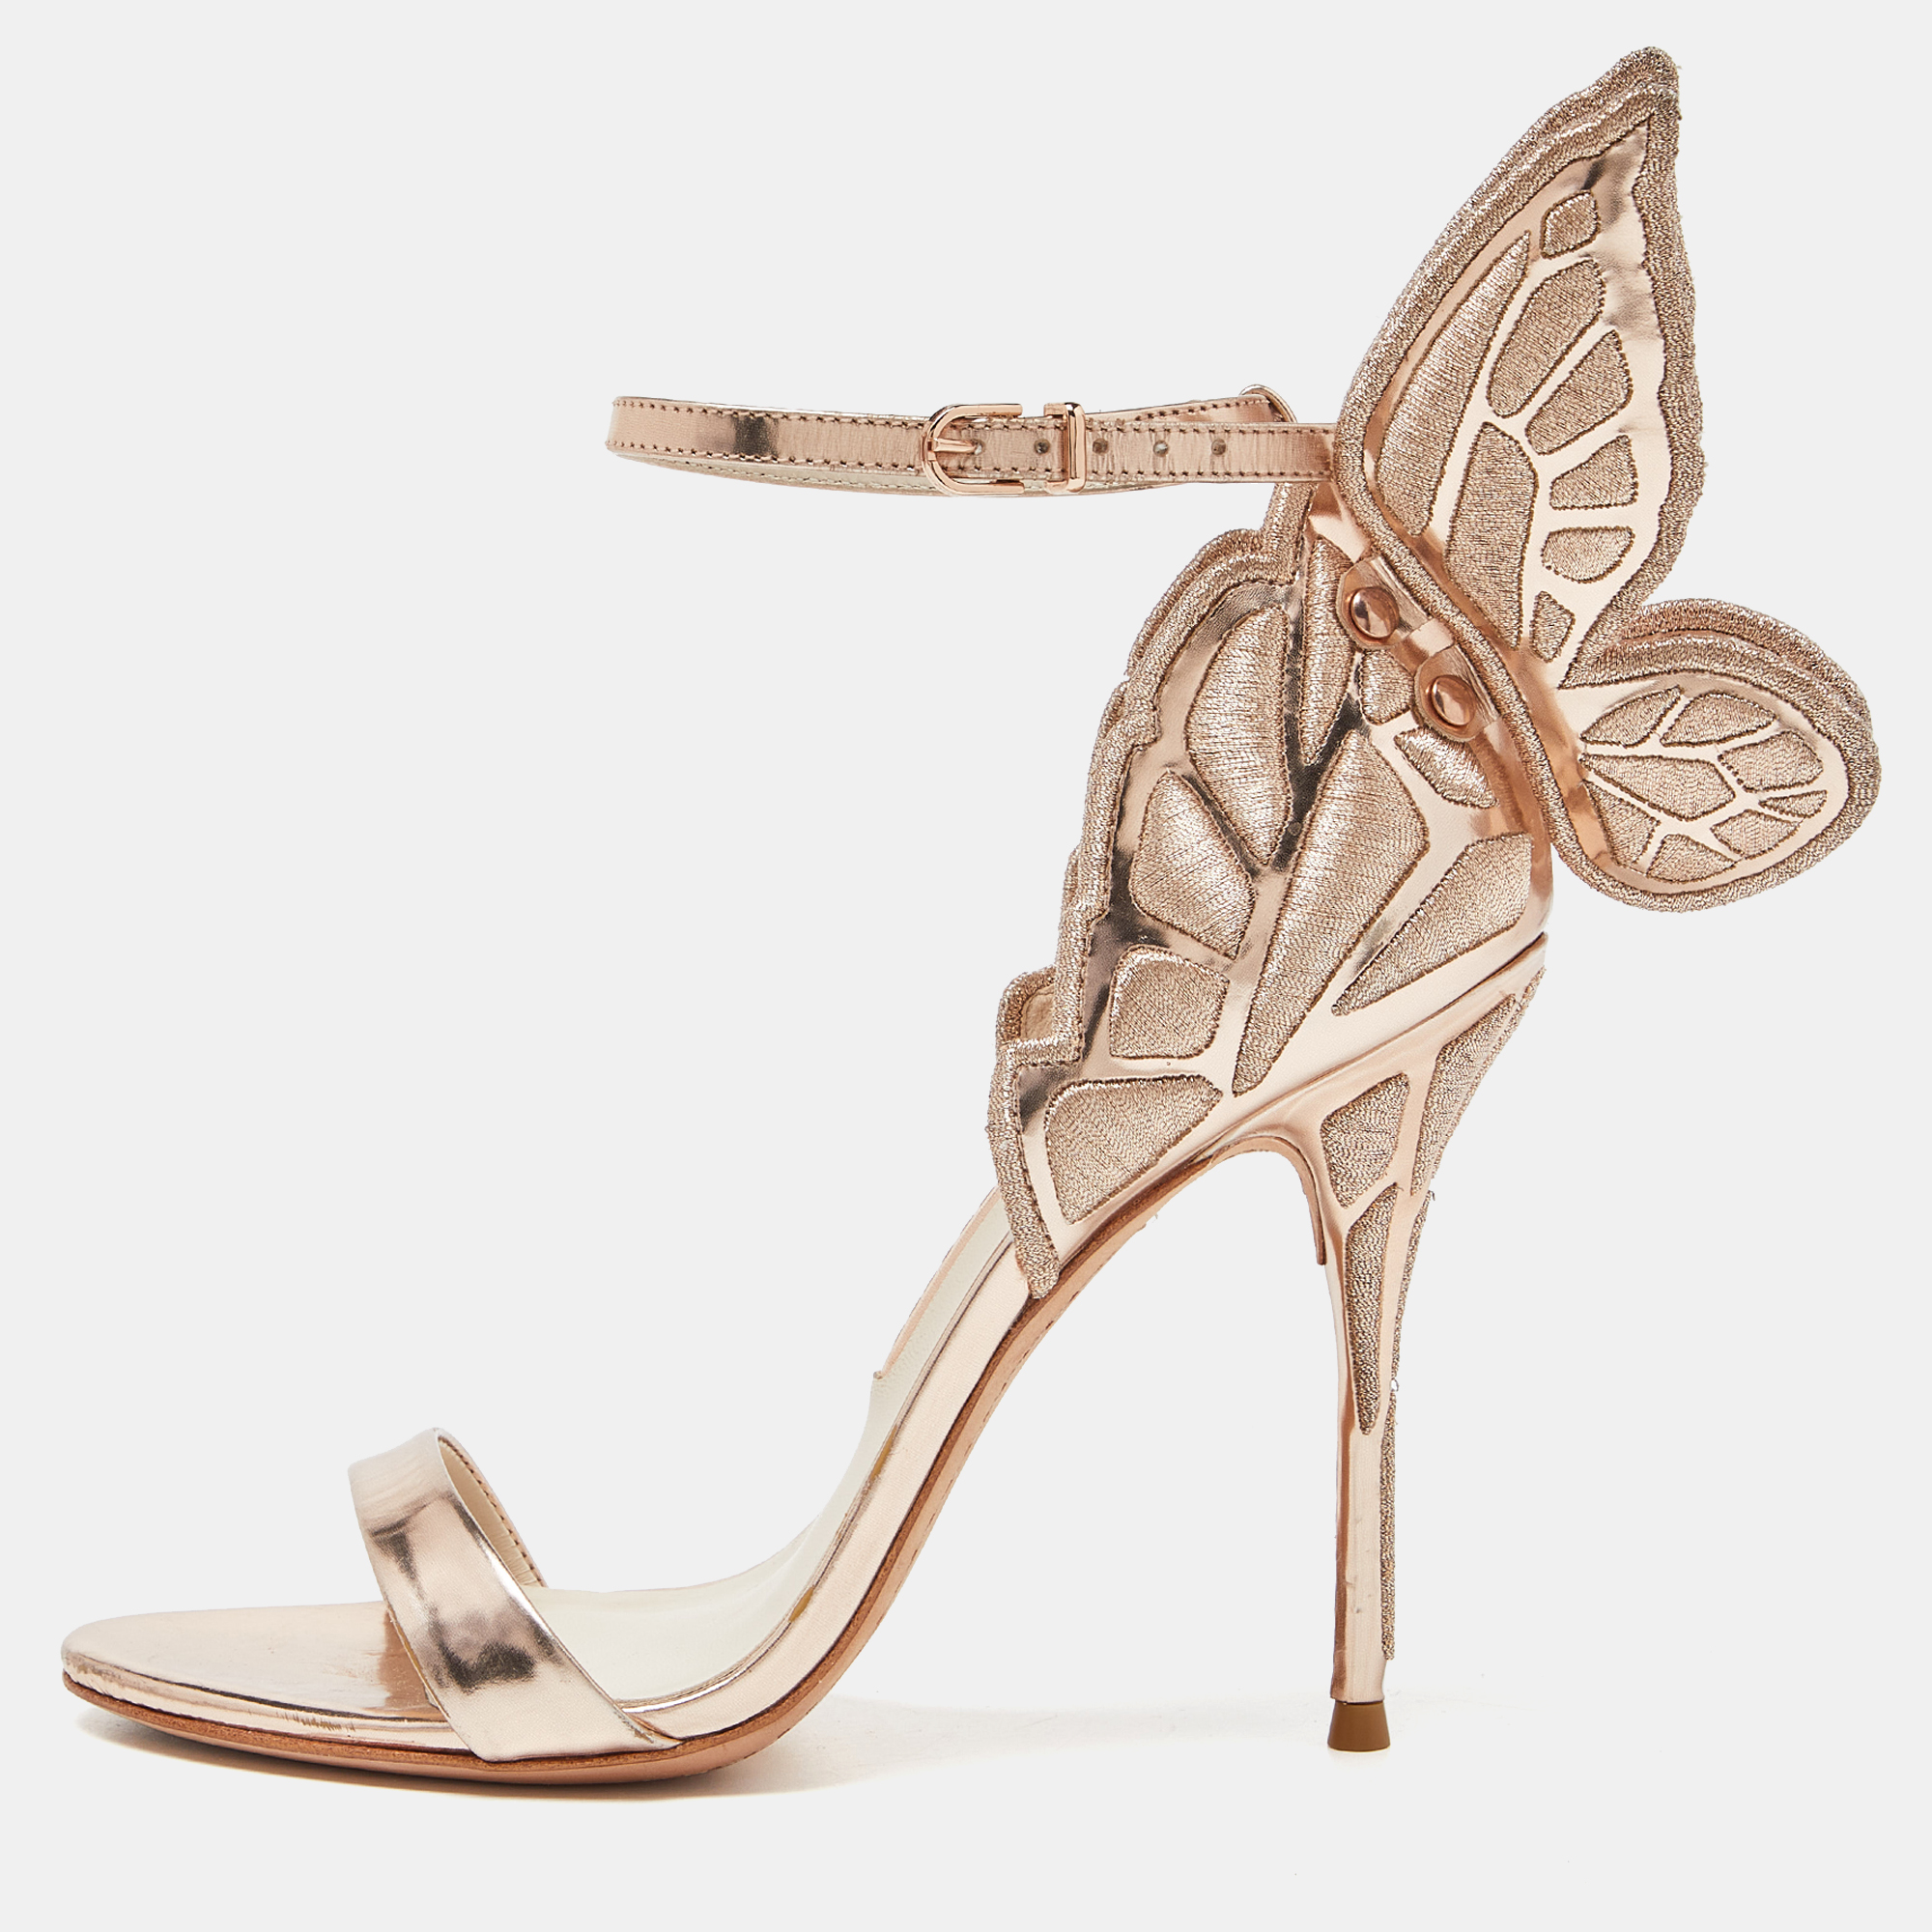 Sophia Webster Rose Gold Embroidered Leather Chiara Butterfly Ankle Strap Sandals Size 37